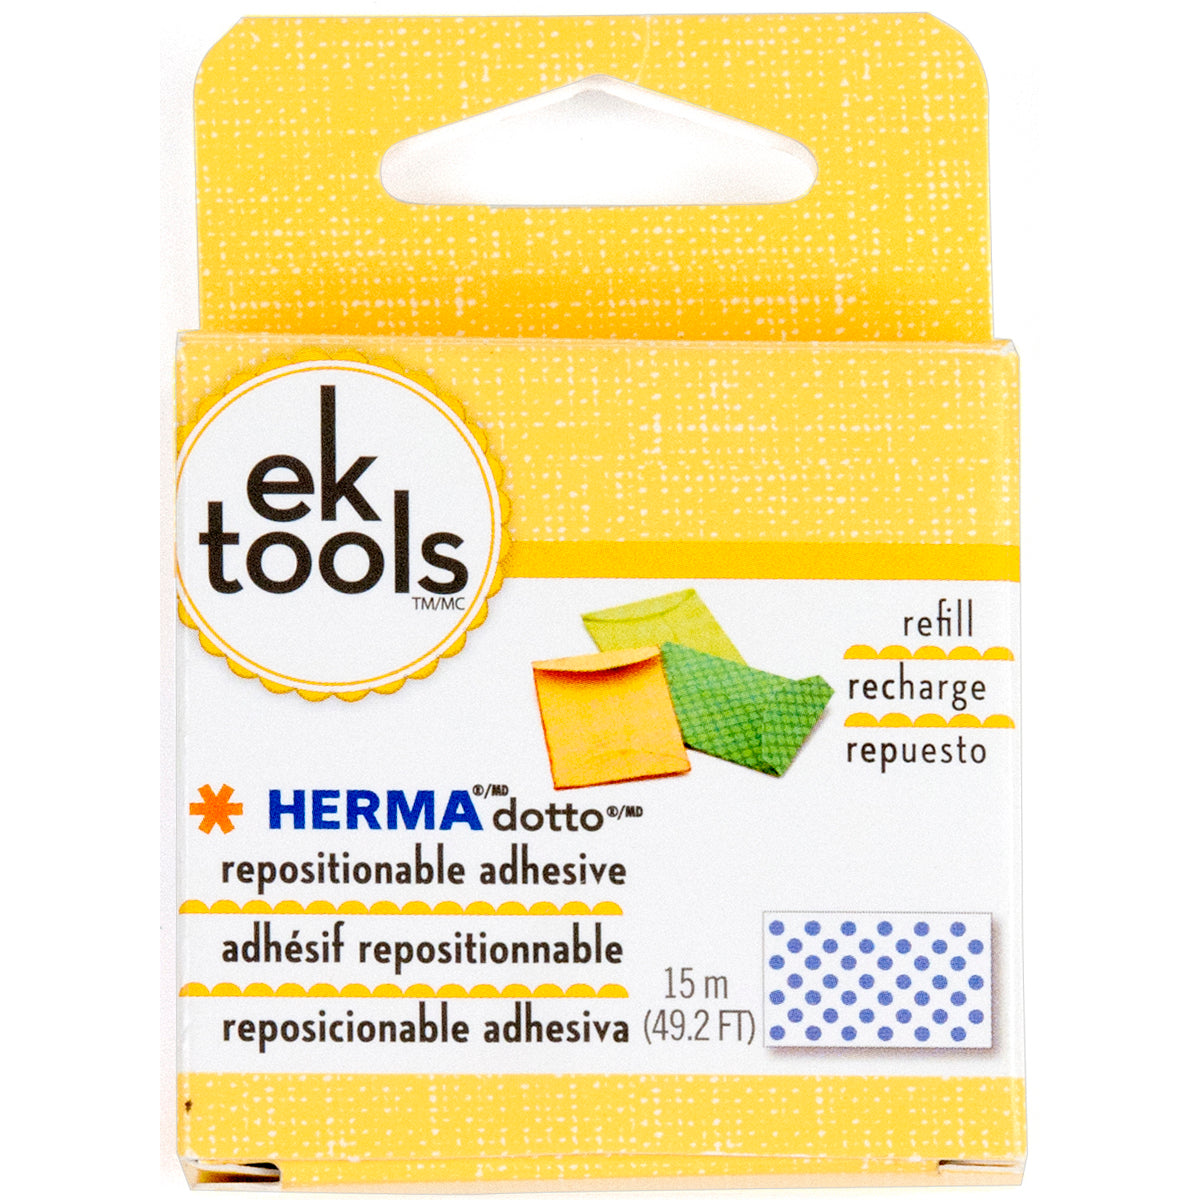 EK Tools HERMA Dotto Repositionable Adhesive Refill-49.2' For Use In 55-00054 & 55-01073